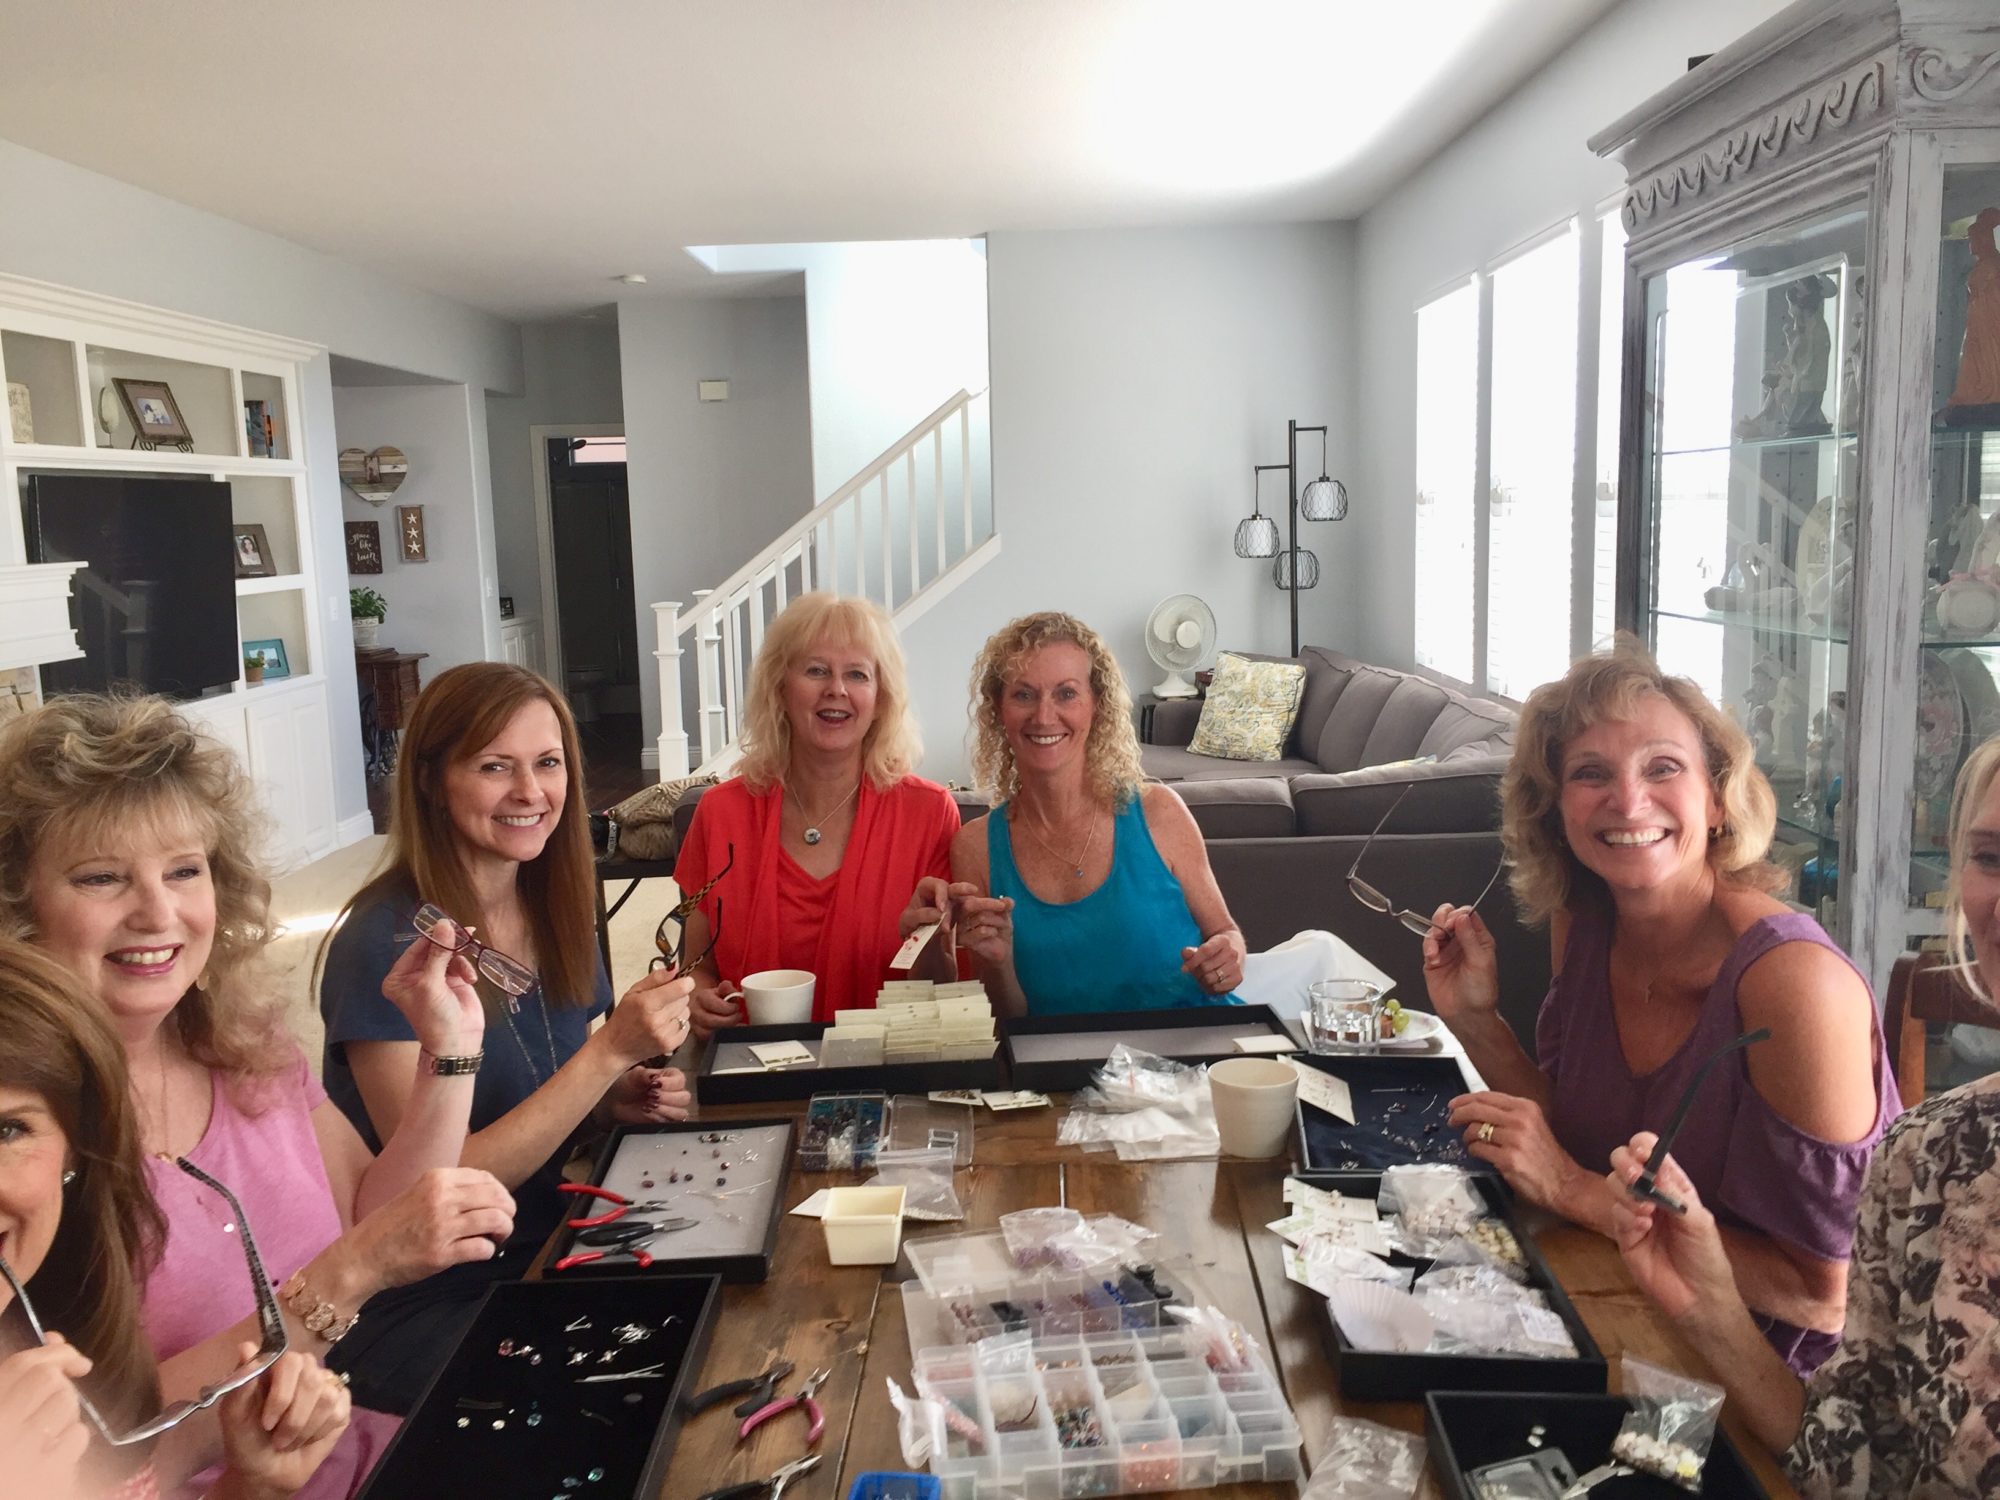 Jewelry Making to Support Adoption - Home for Good Foundation - Tues AM